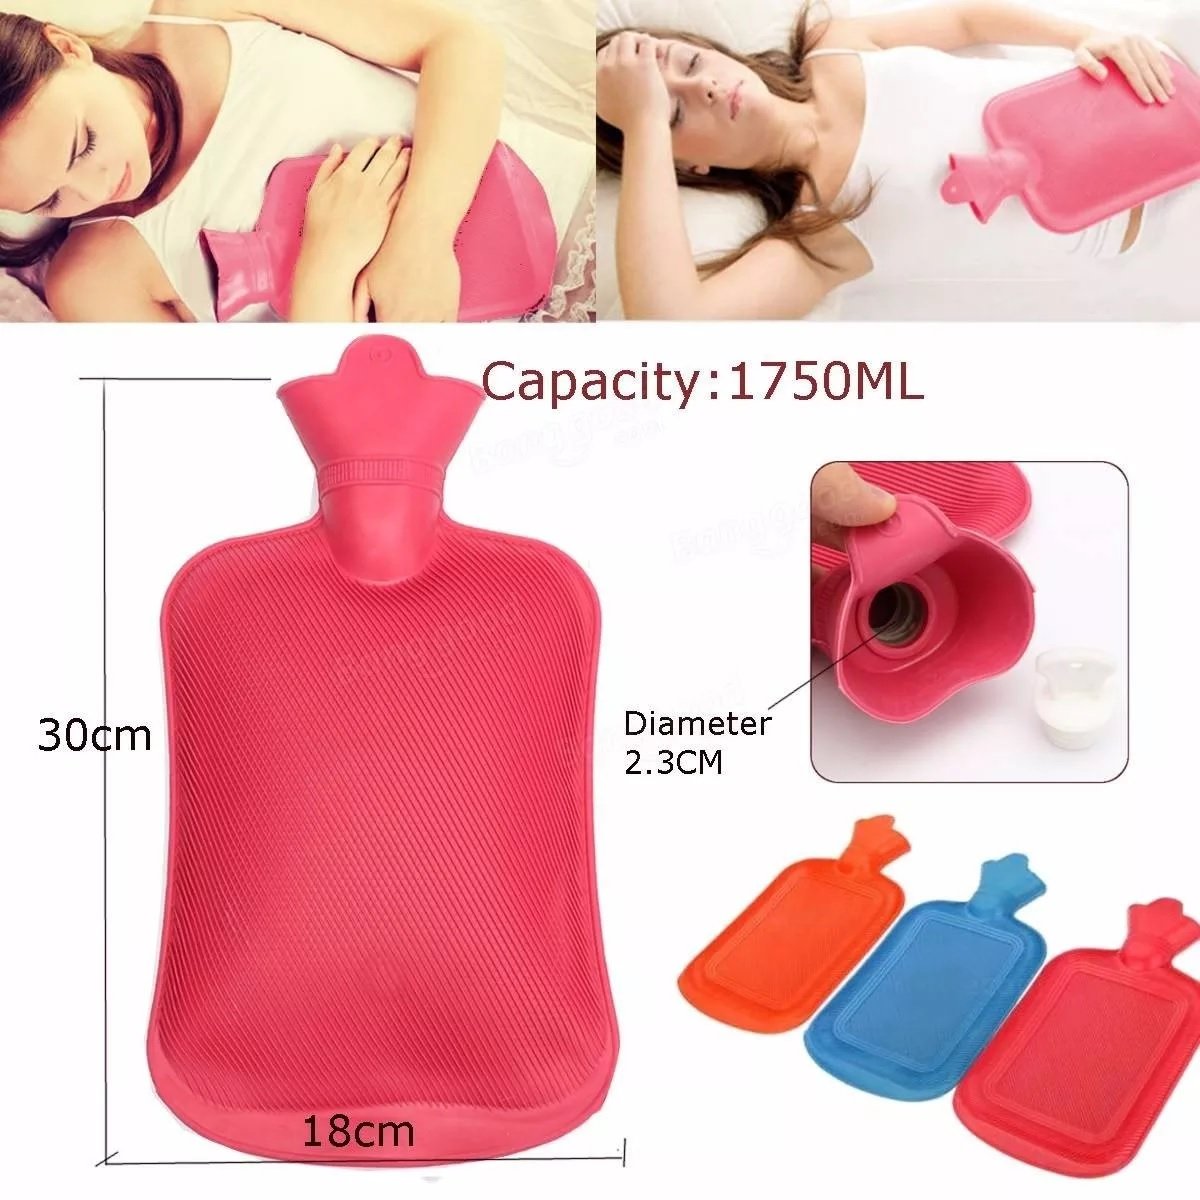 Rubber Hot Water Bottle: 8 Best Rubber Hot Water Bottles in India For  Maximum Pain Relief (2023) - The Economic Times